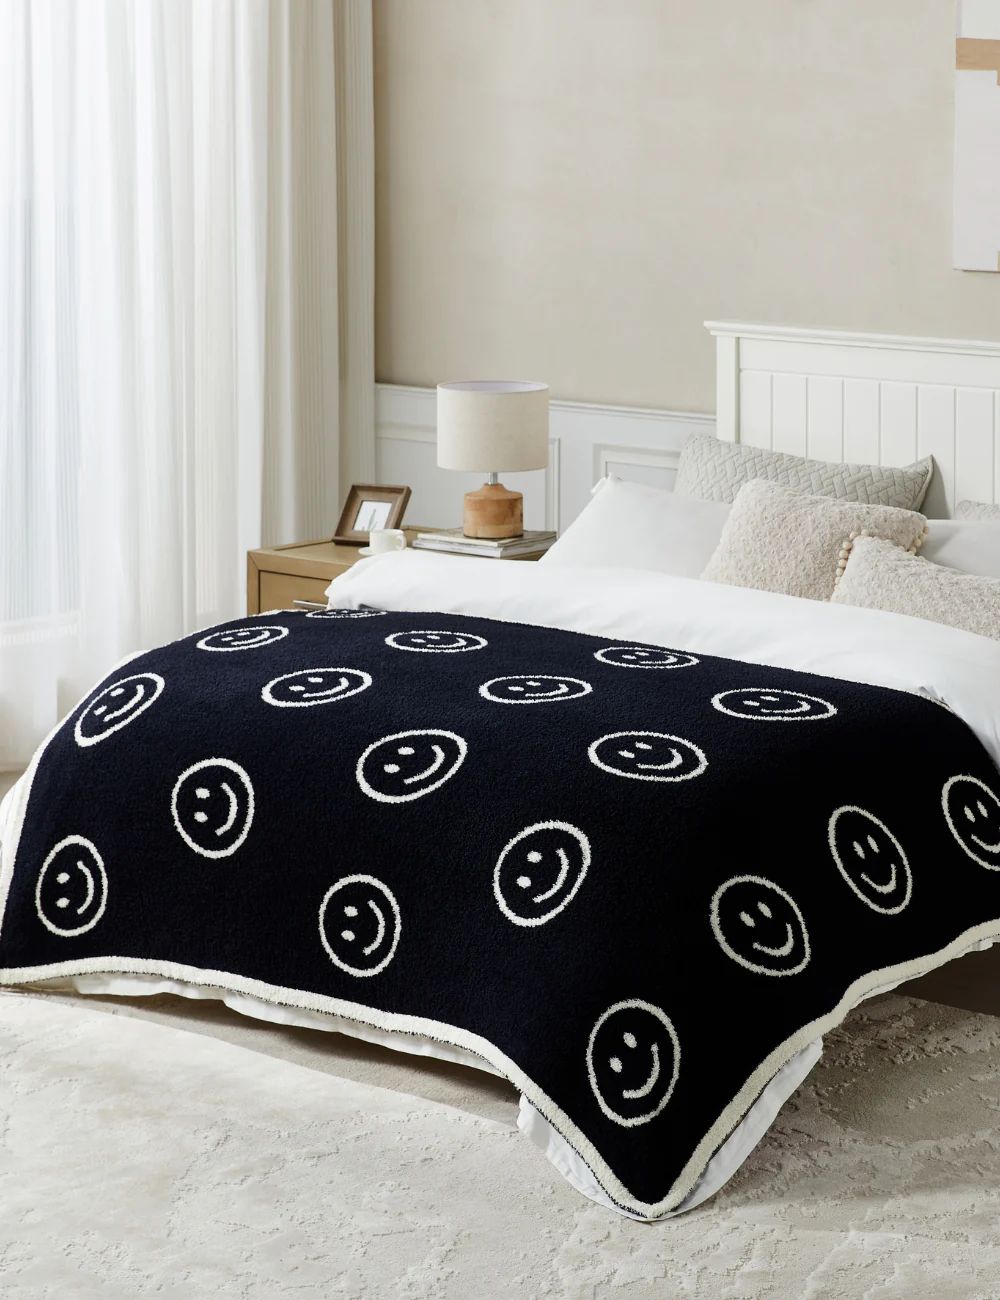 Smiley Buttery Blanket | The Styled Collection